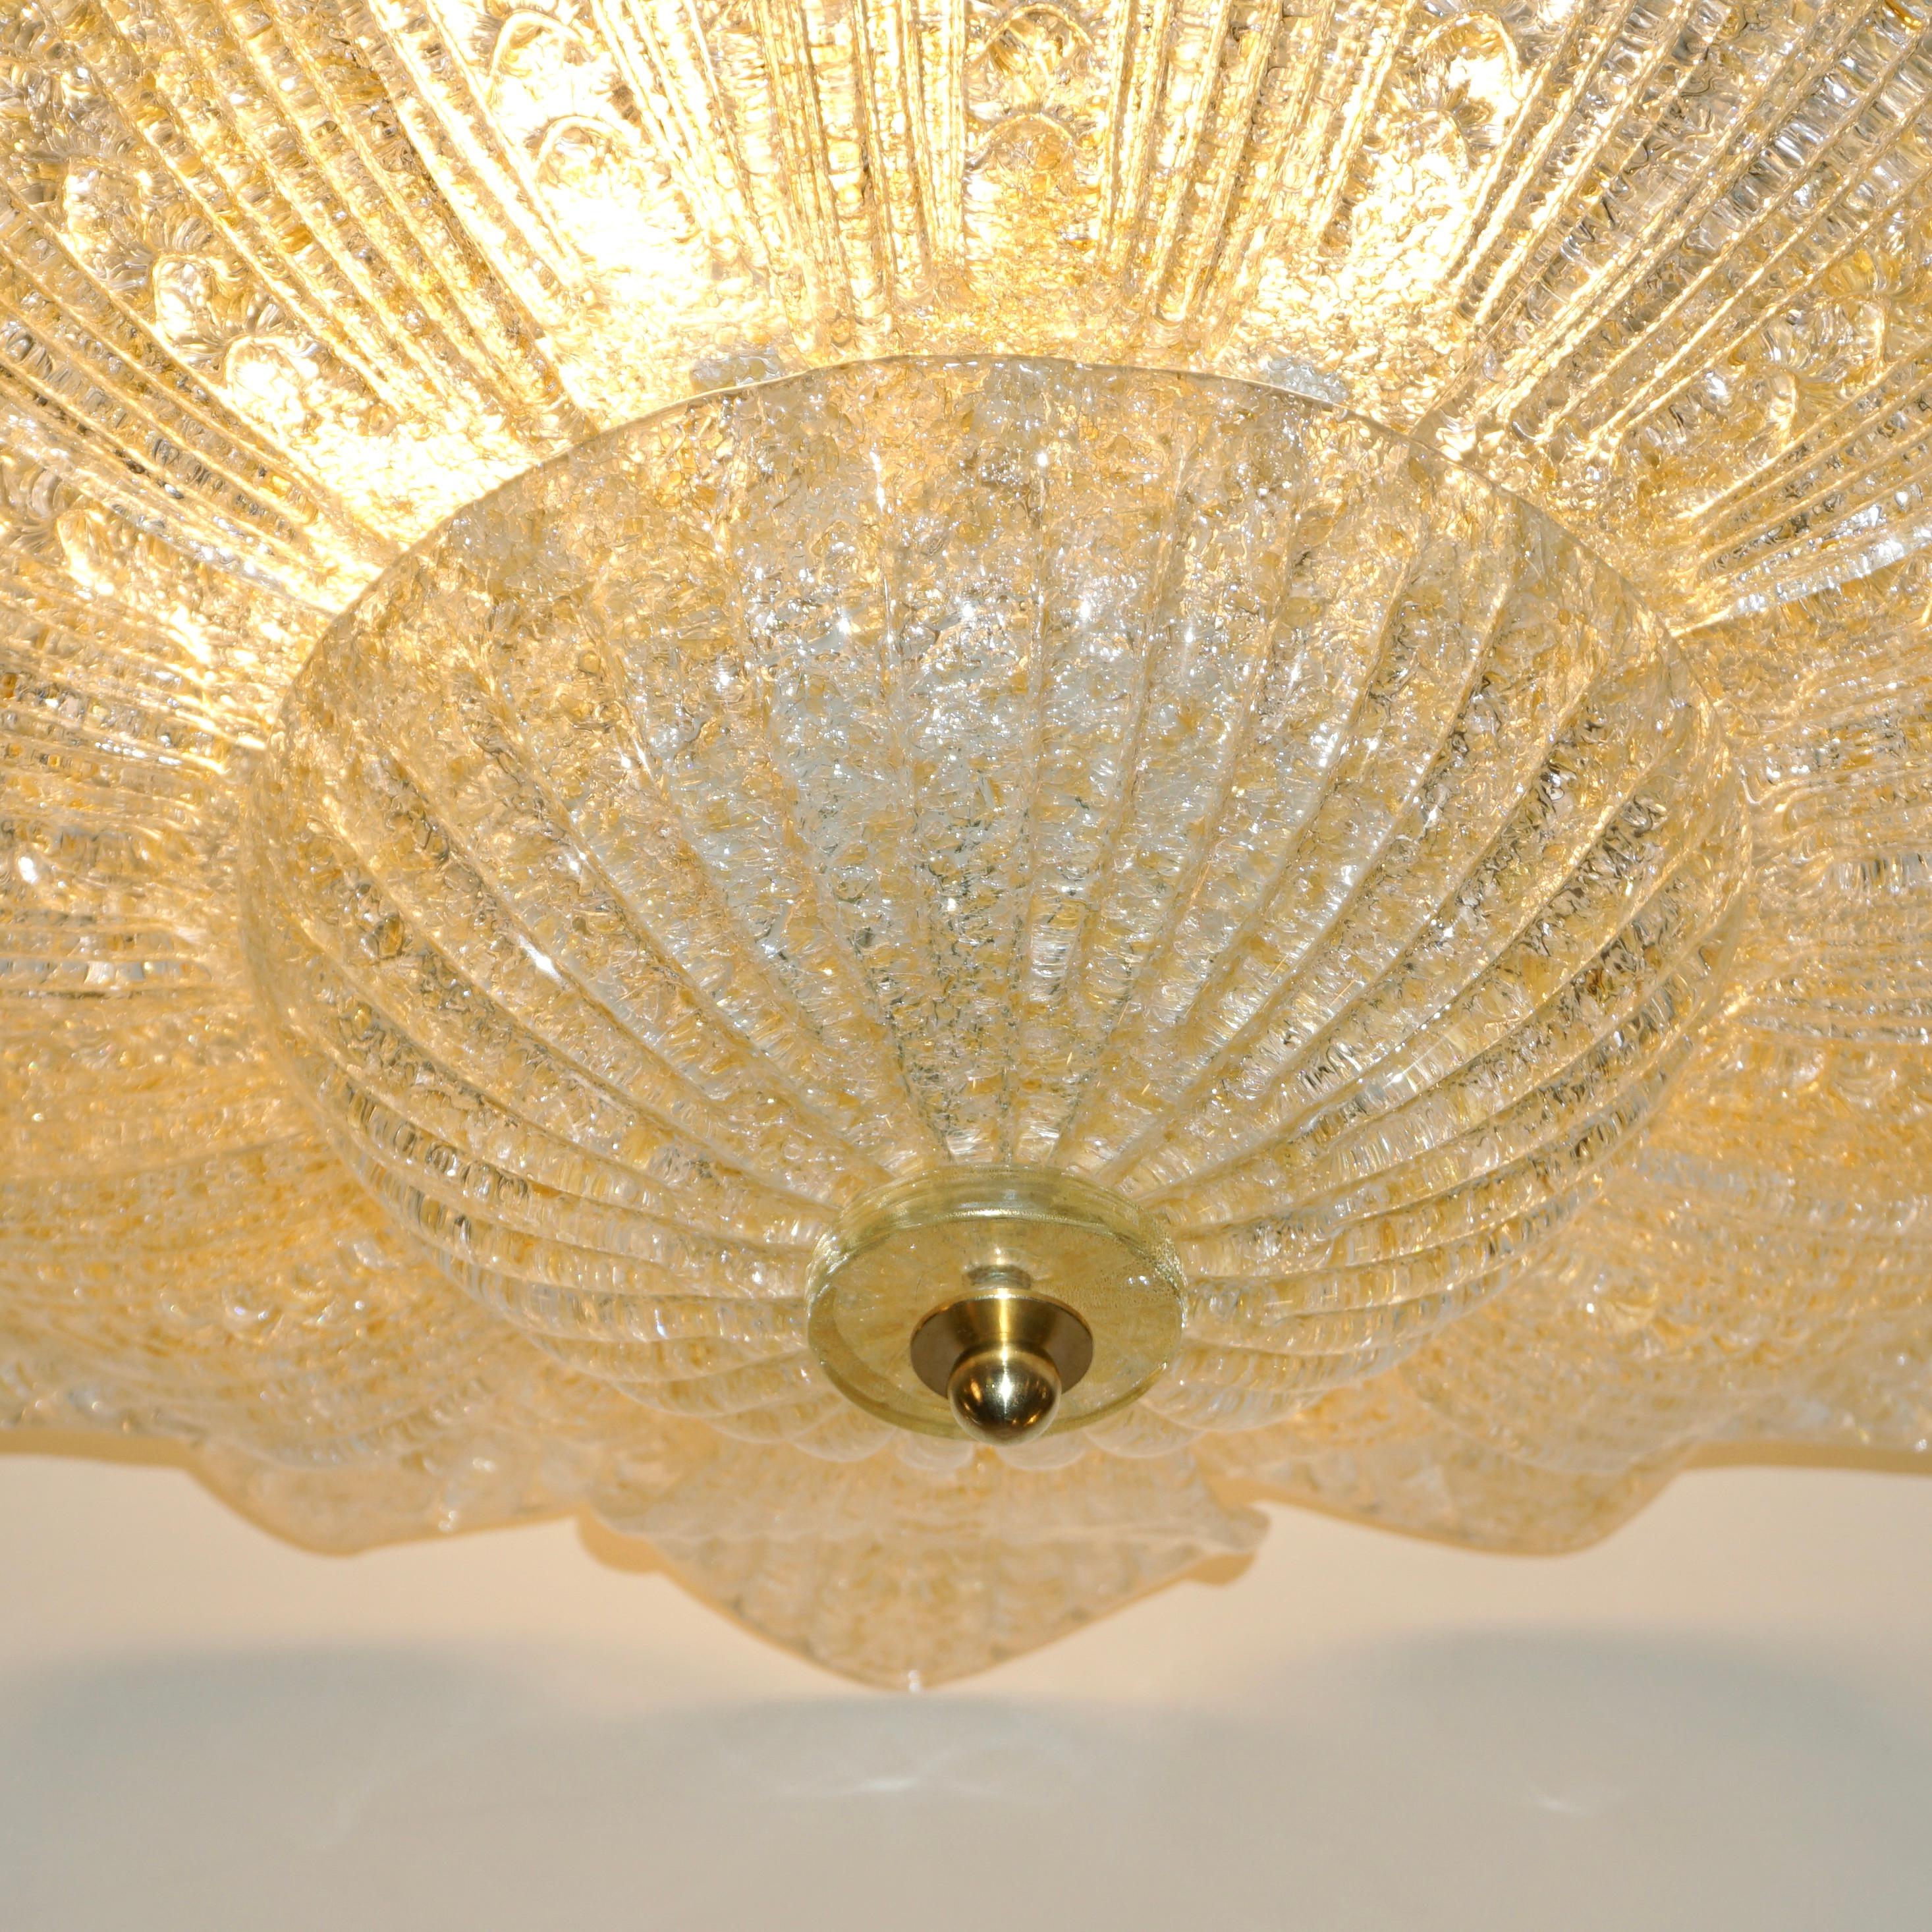 Barovier Toso Style Italian Gold Textured Murano Glass Flower Leaf Flushmount For Sale 4